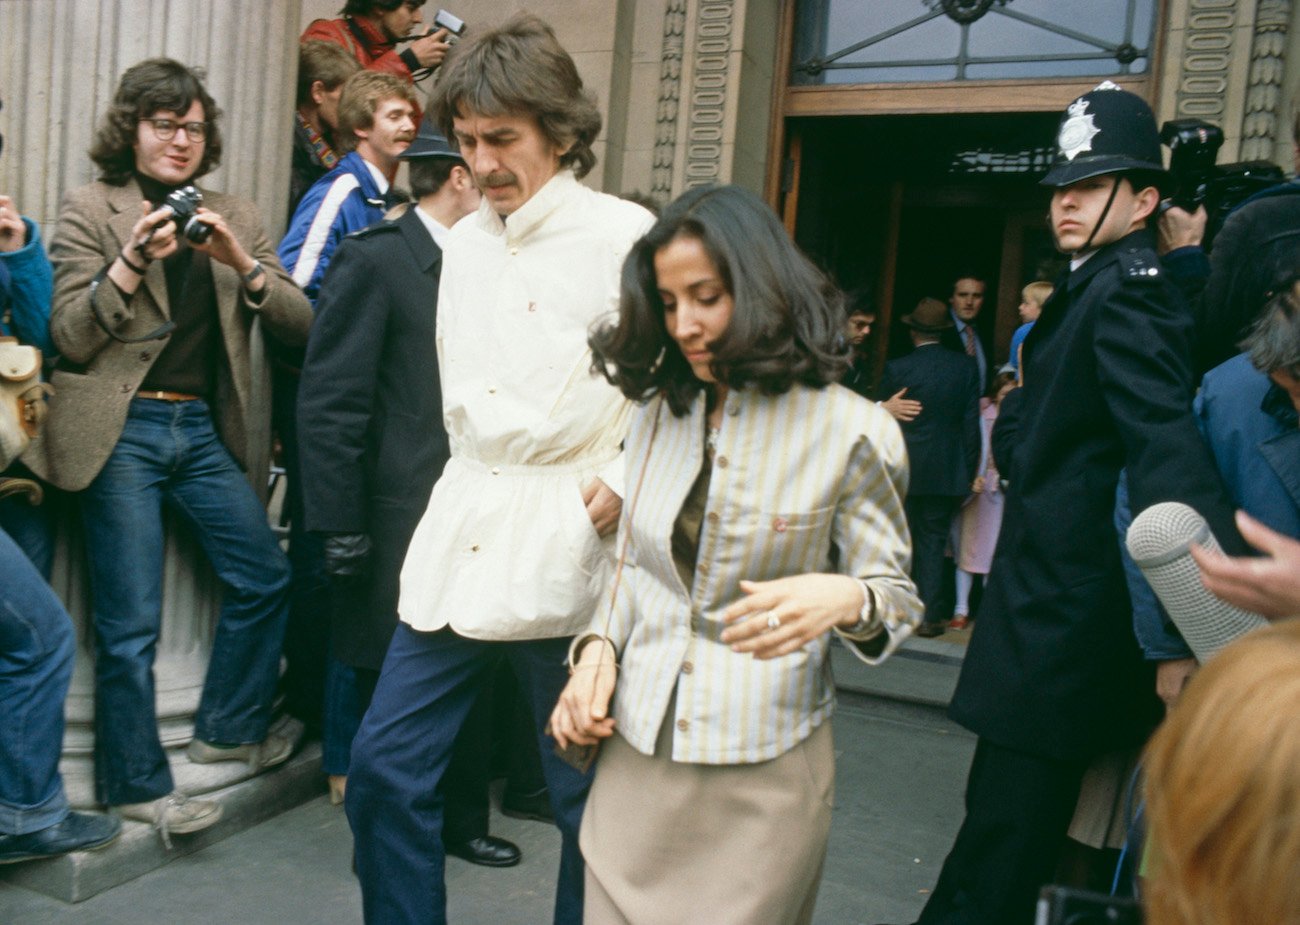 George Harrison and his wife Olivia coming out of Marylebone Register Office after Ringo Starr and Barbara Bach's wedding in 1981.